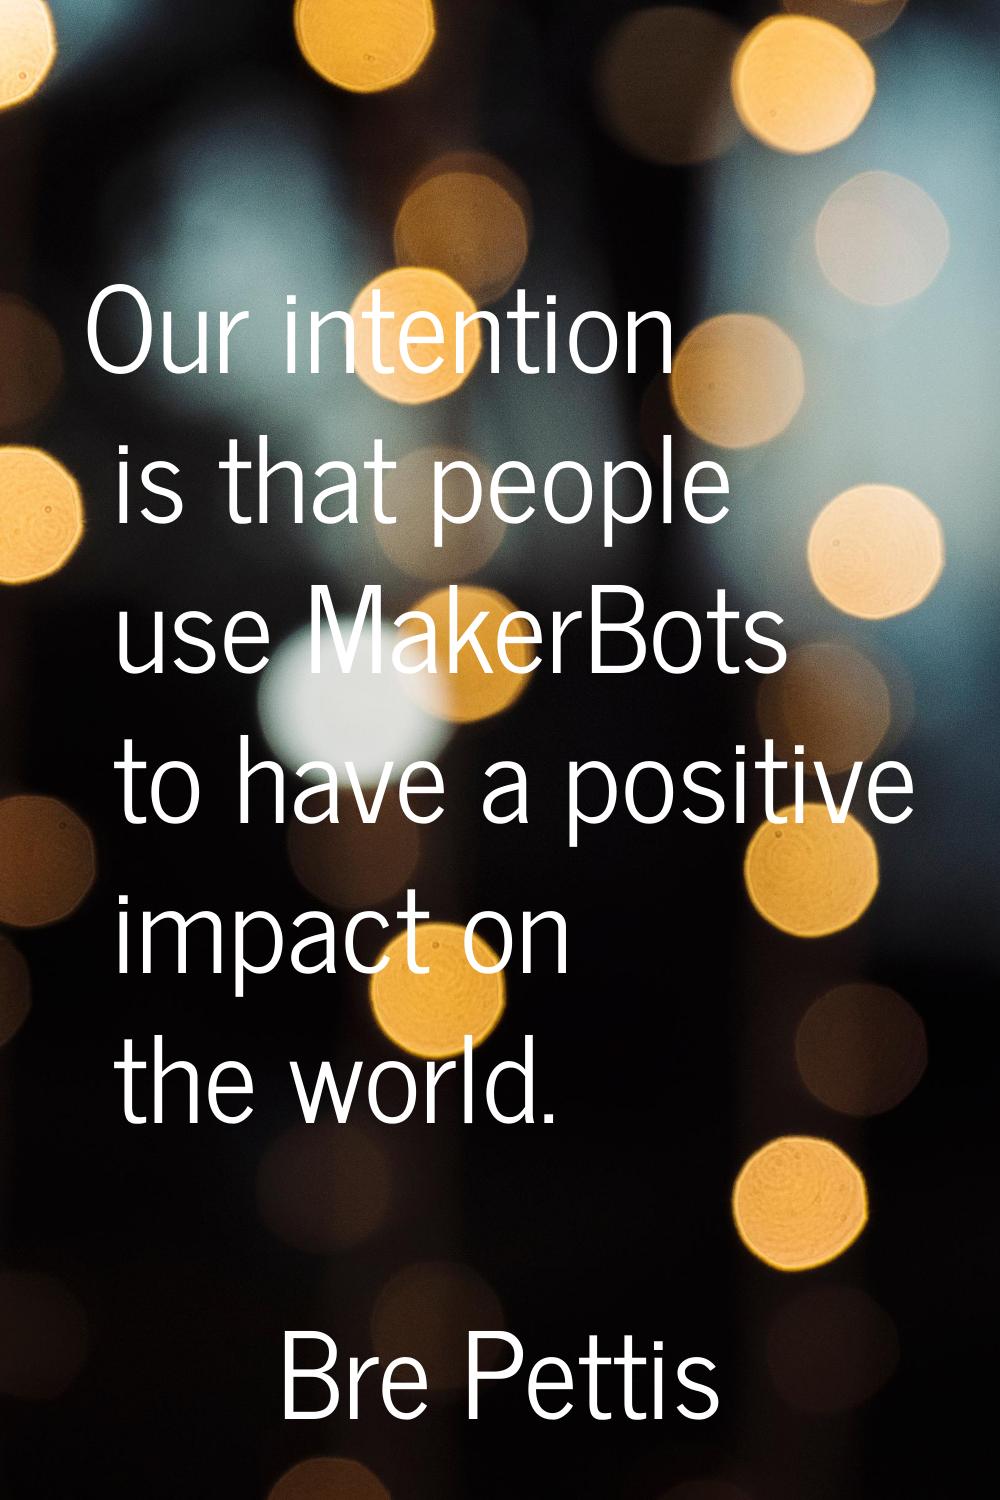 Our intention is that people use MakerBots to have a positive impact on the world.